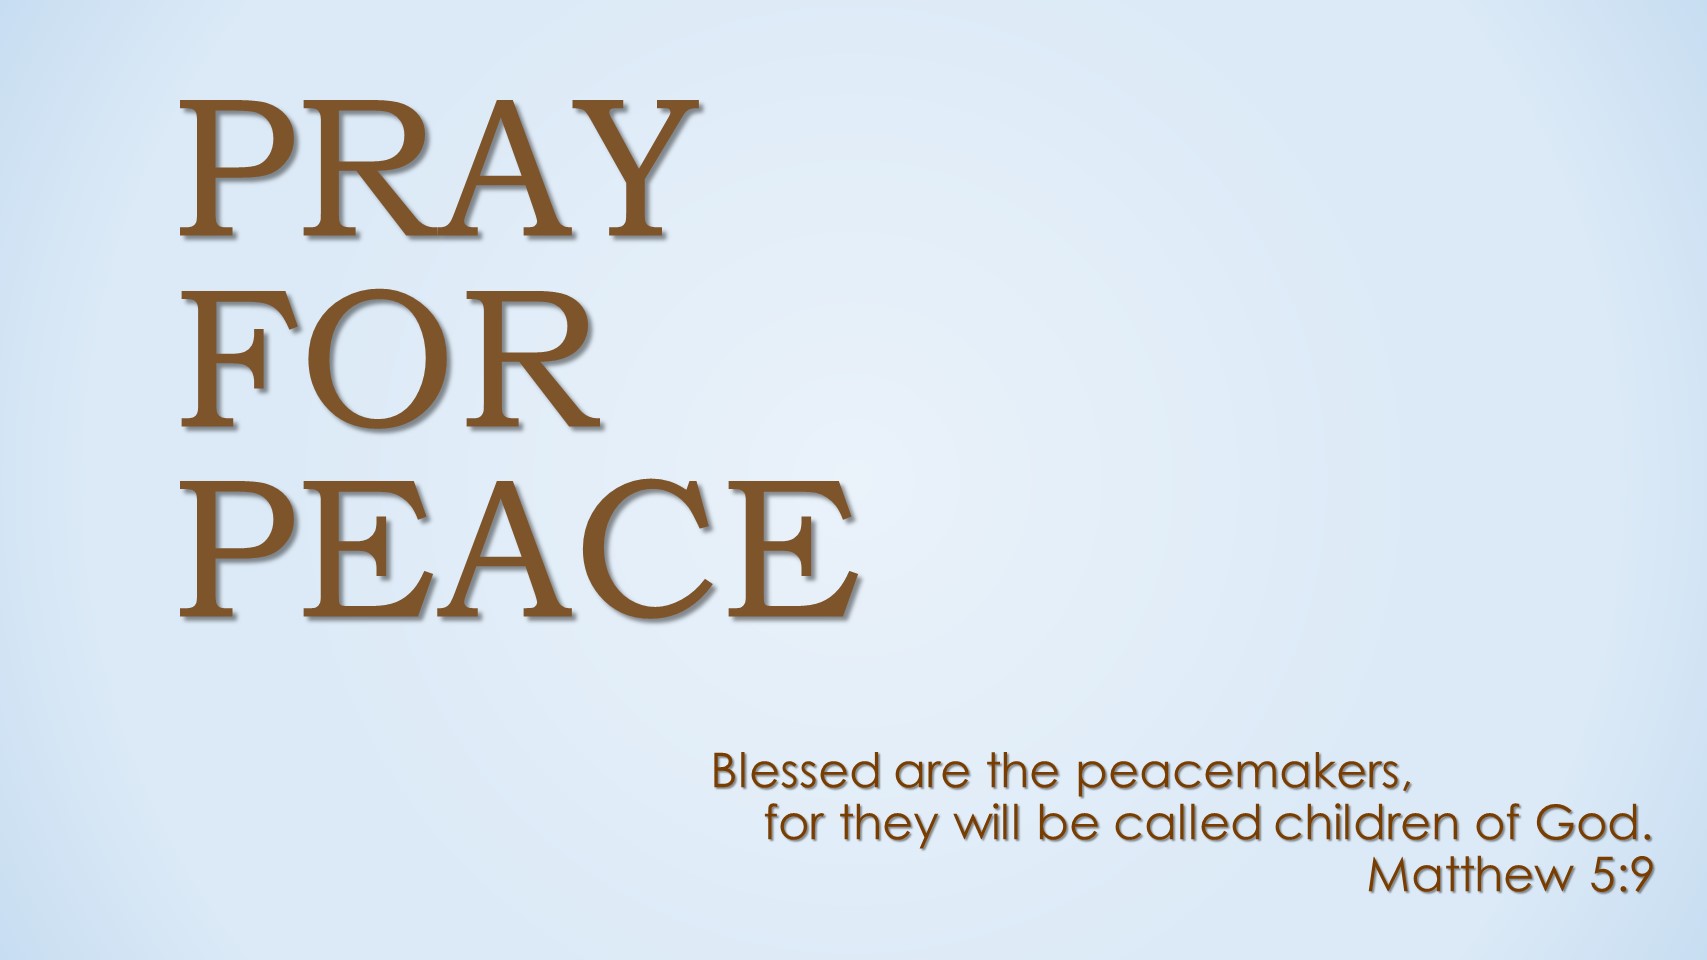 Praying for Peace